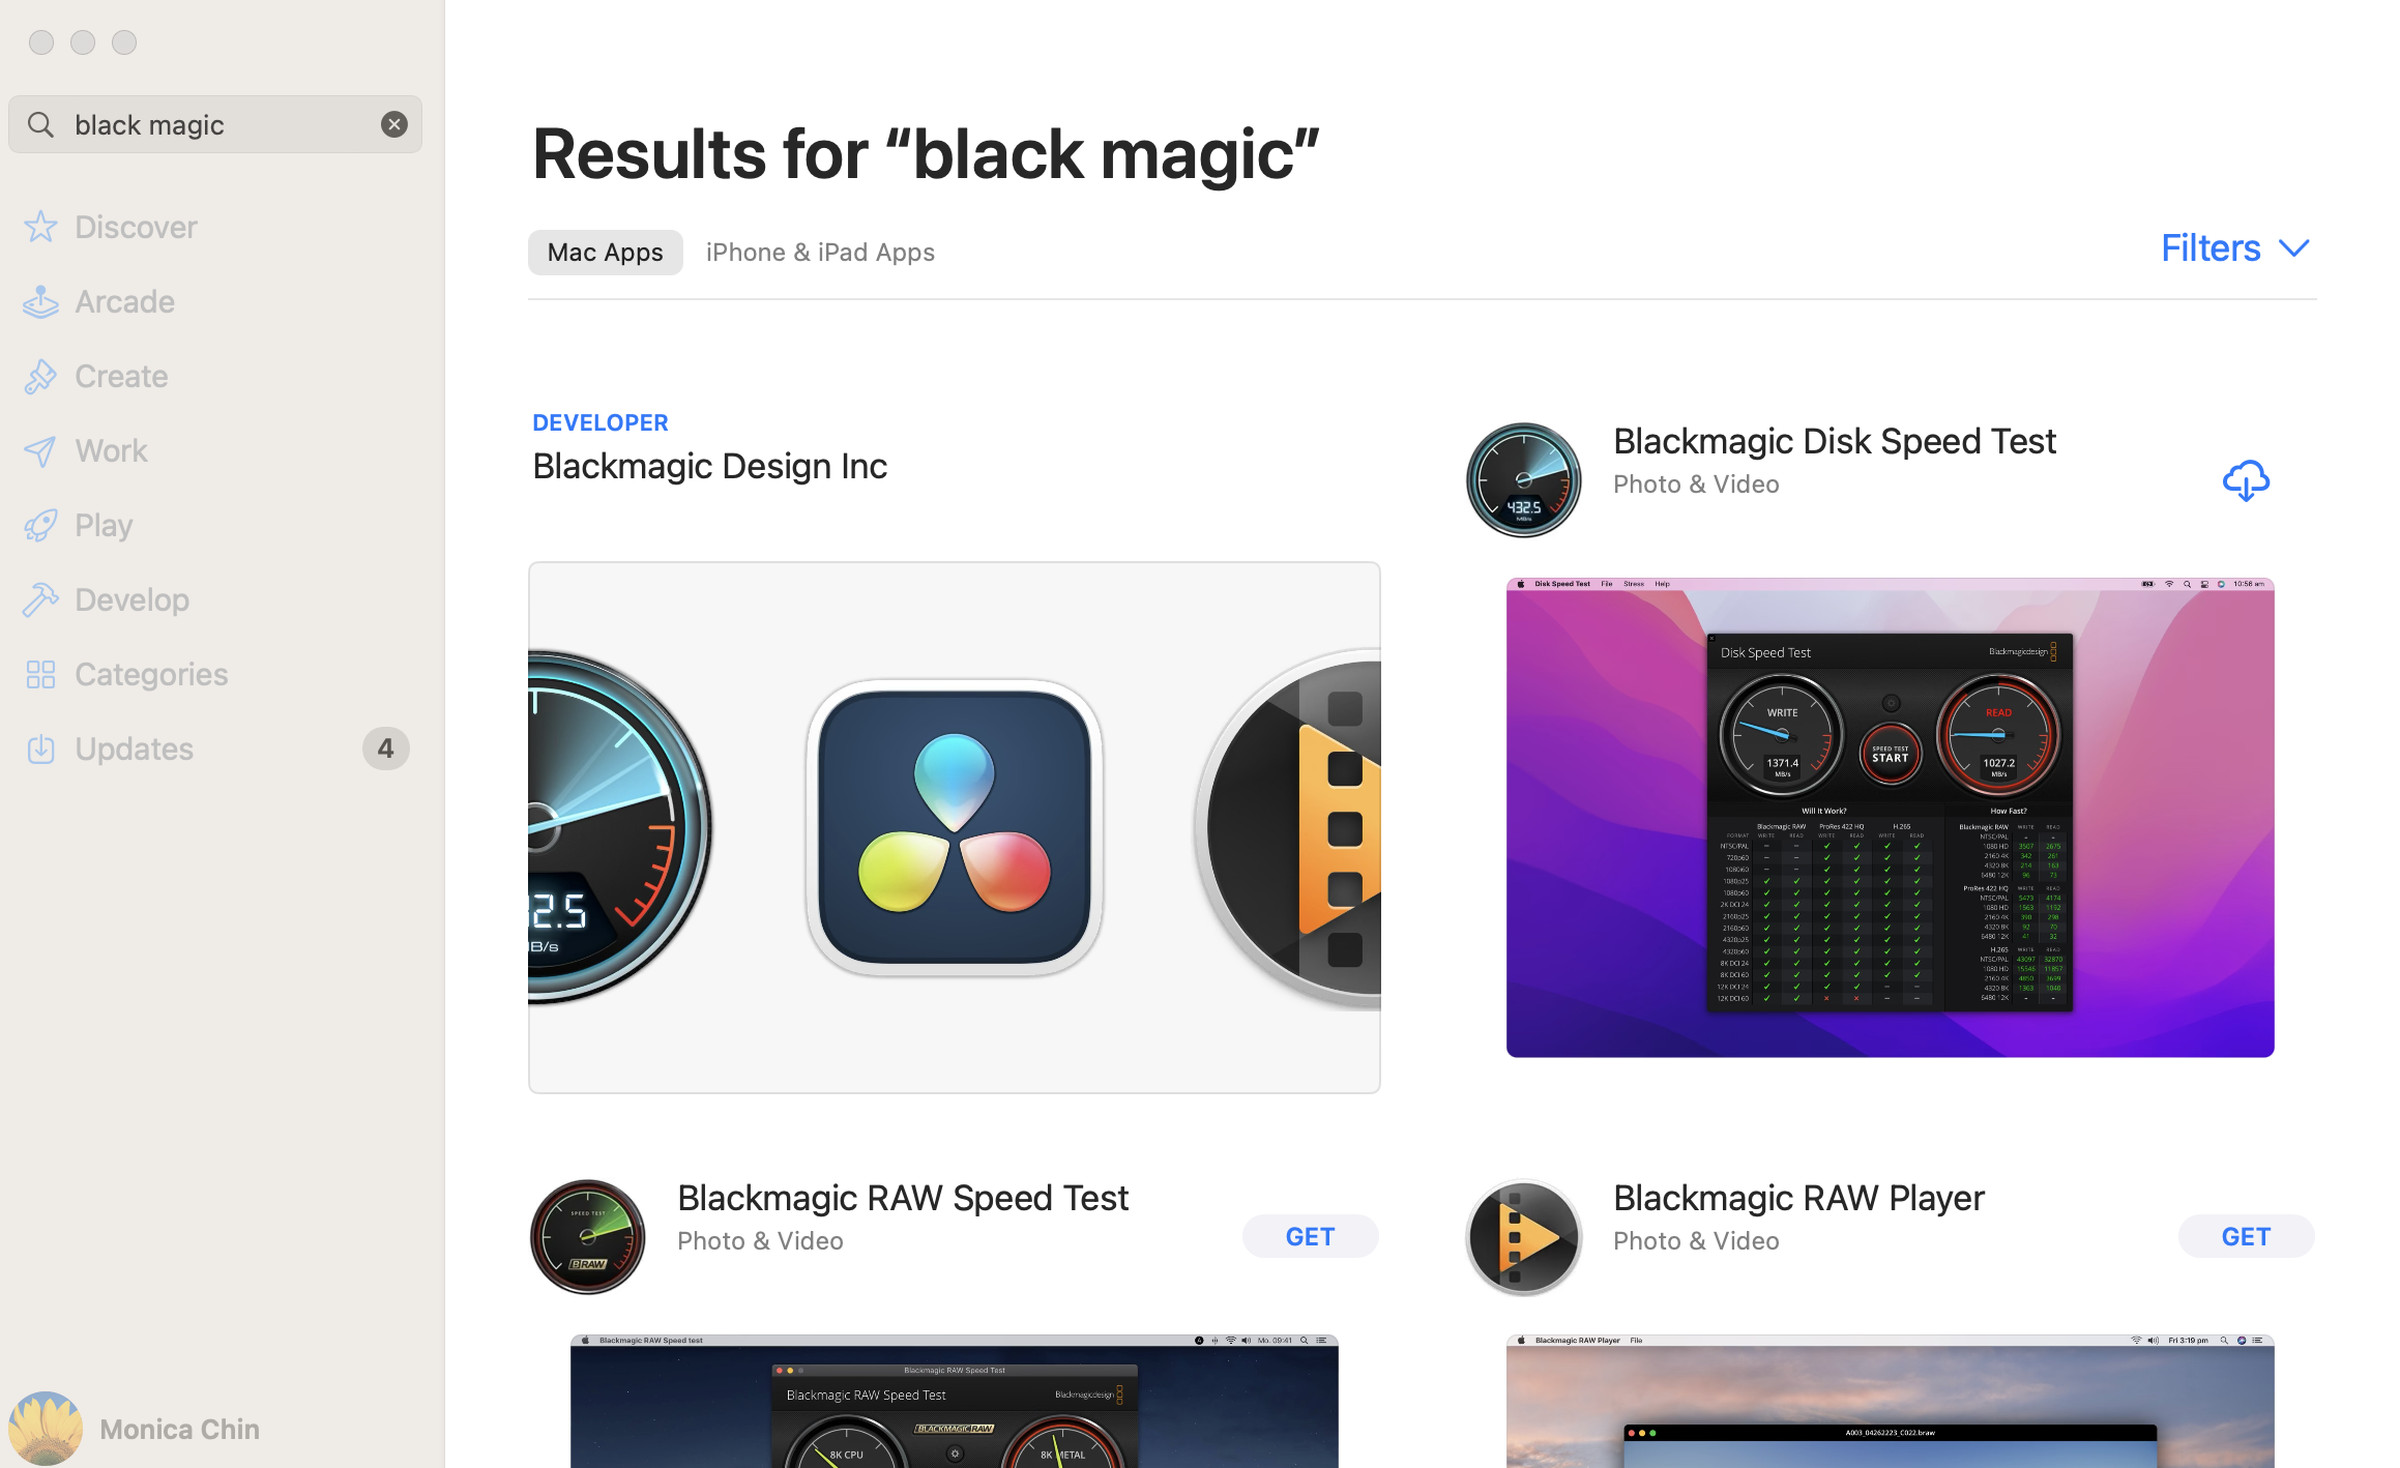 A screenshot of the App Store showing search results for “Black Magic”.